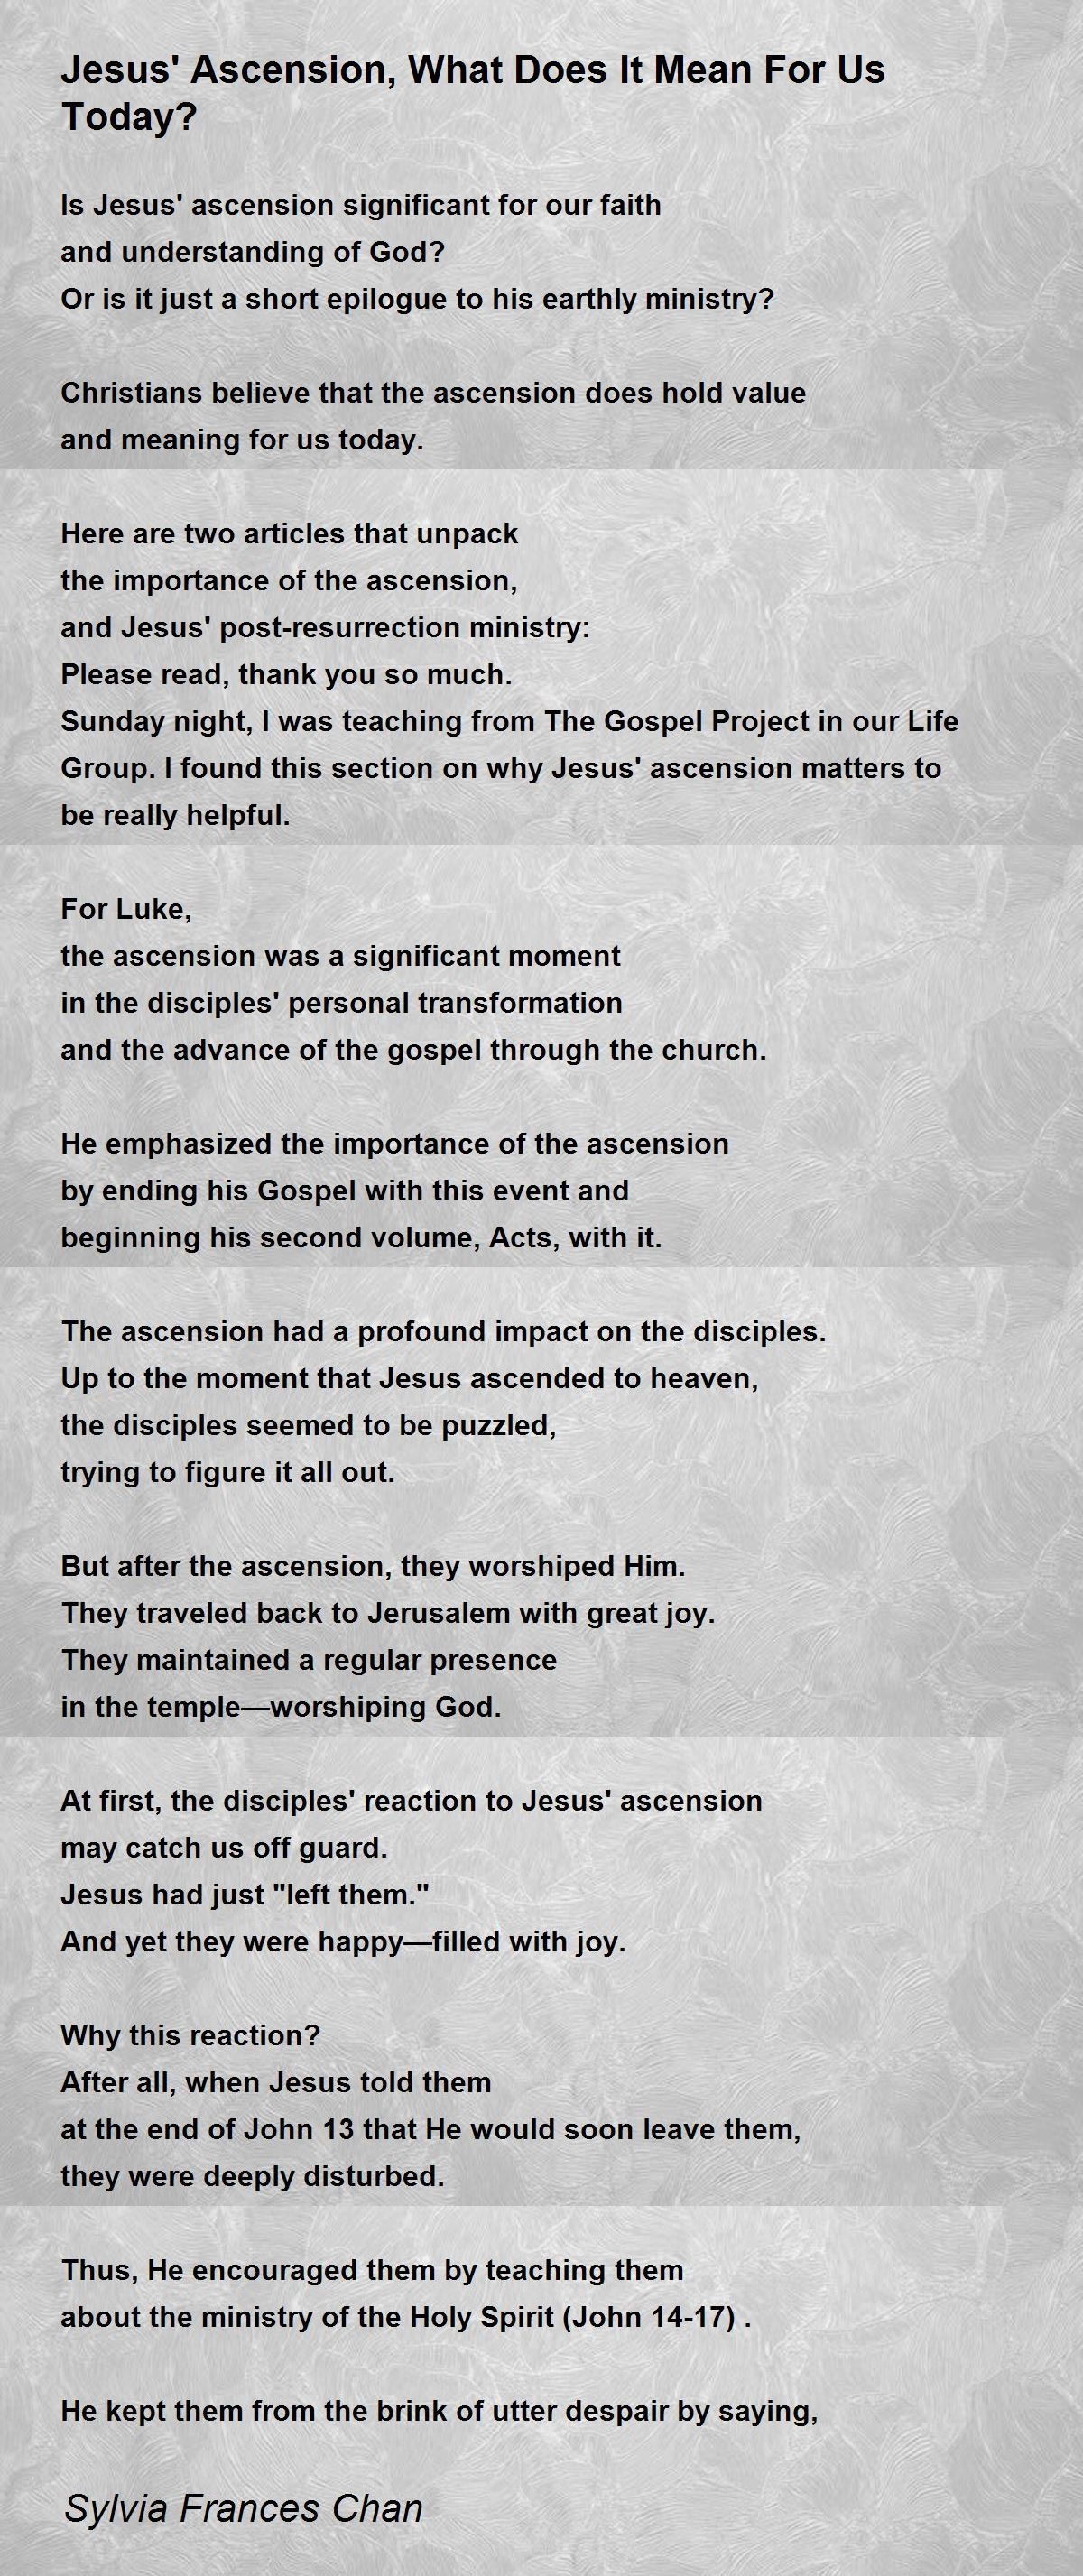 Jesus Ascension What Does It Mean For Us Today By Sylvia Frances Chan Jesus Ascension What Does It Mean For Us Today Poem